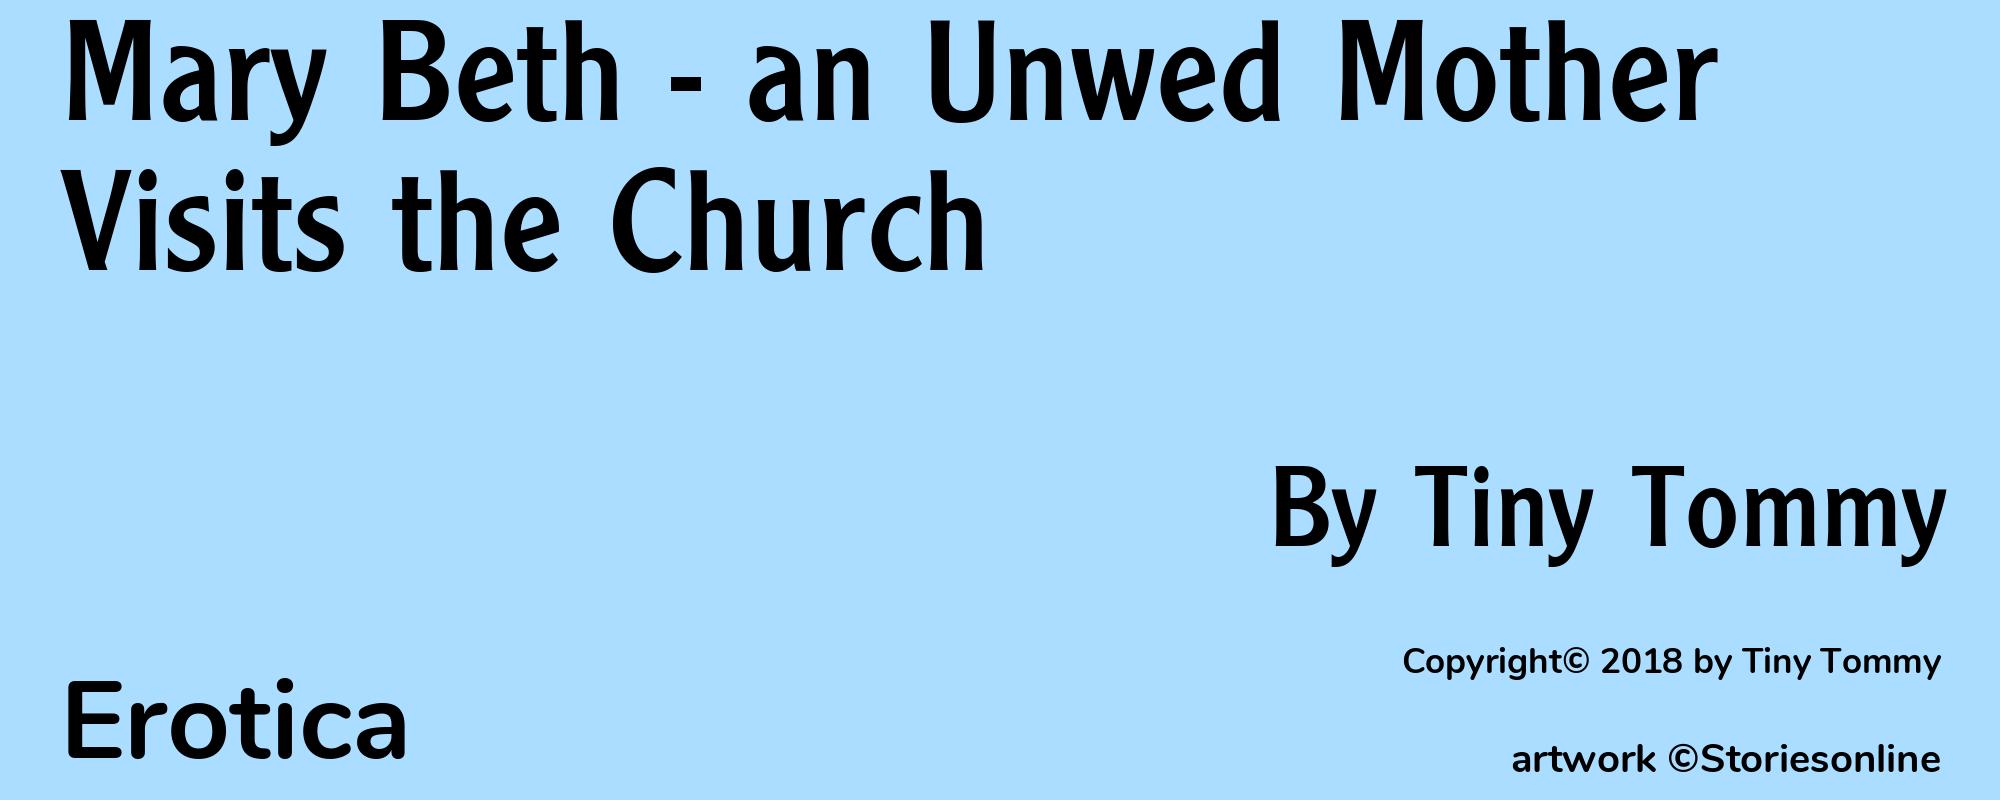 Mary Beth - an Unwed Mother Visits the Church - Cover